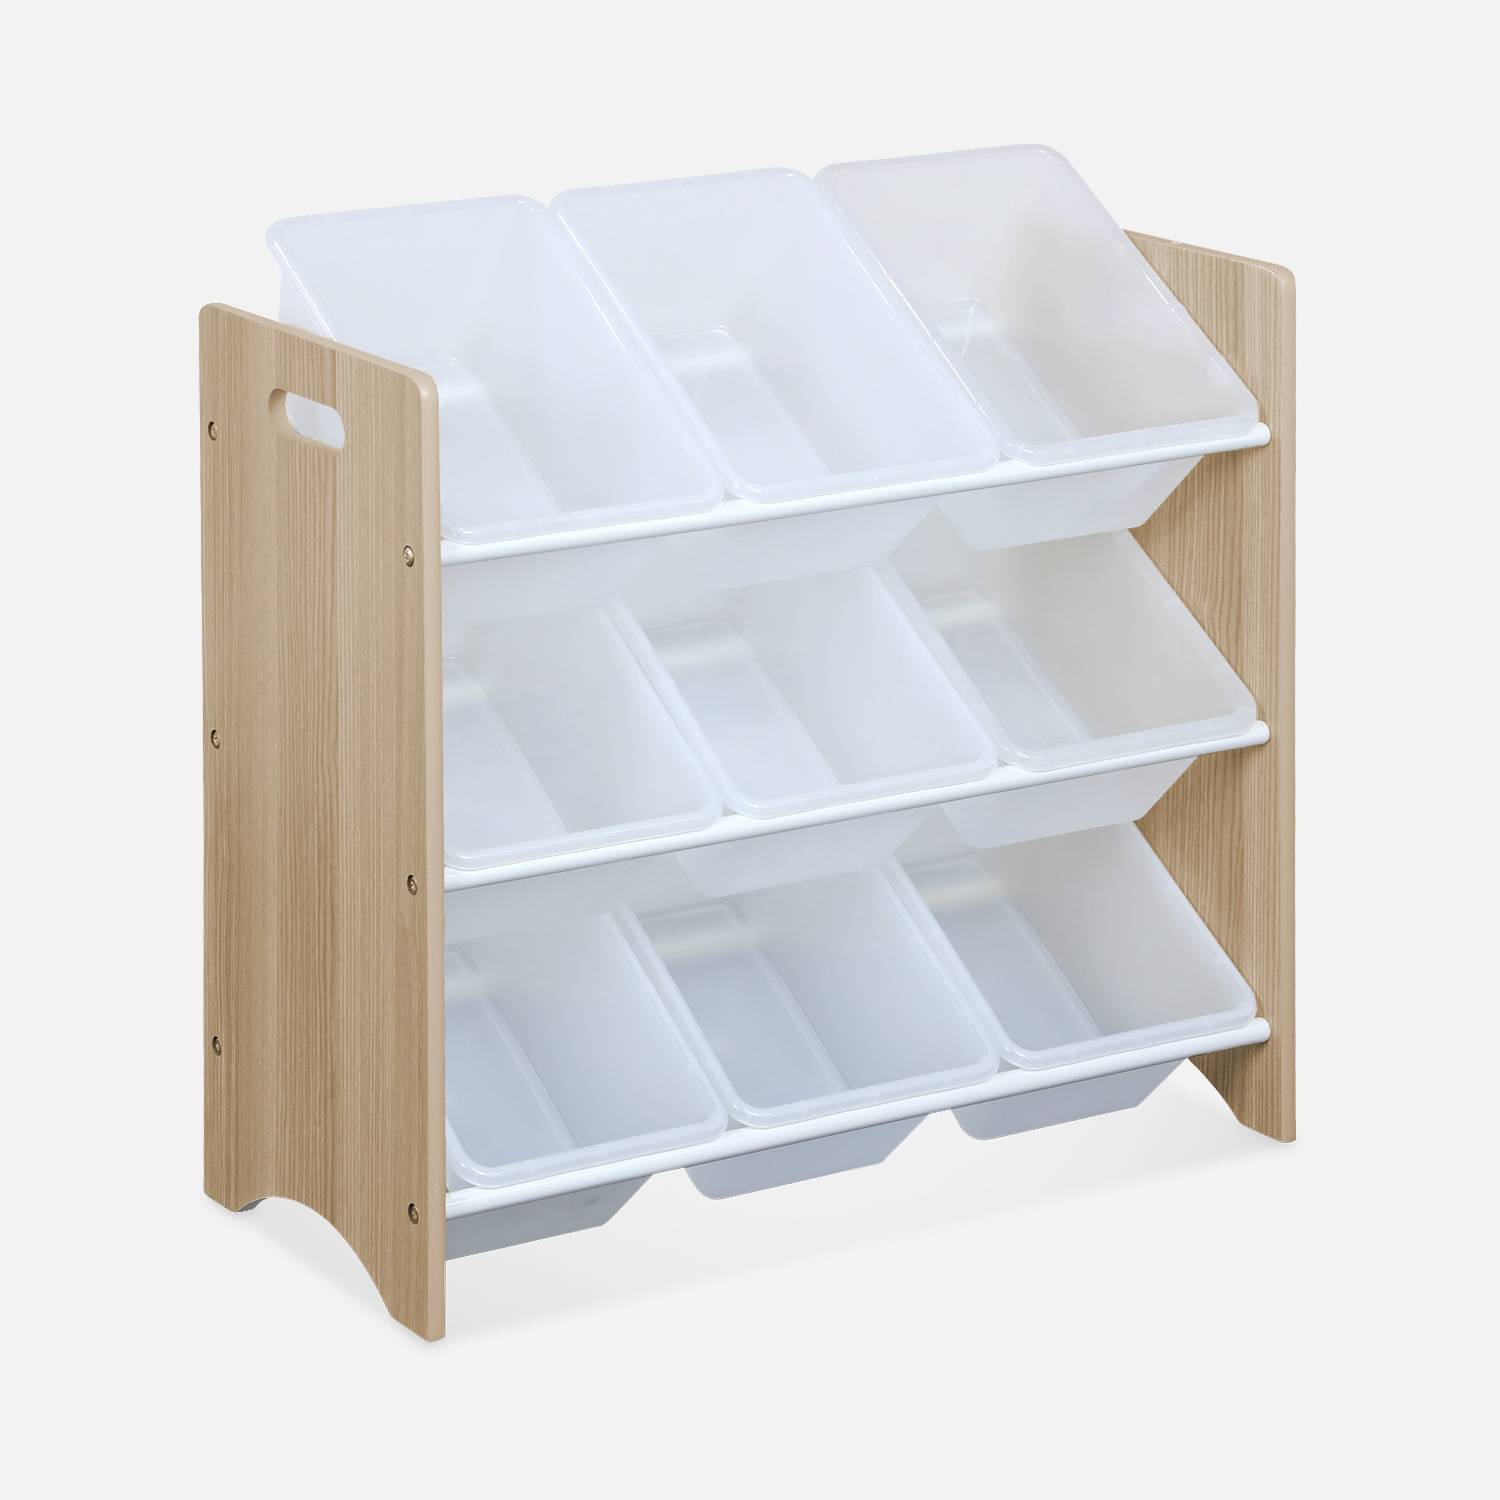 Storage unit for children with 9 compartments, MDF & natural wood, 64x29.5x60cm, Tobias,sweeek,Photo3